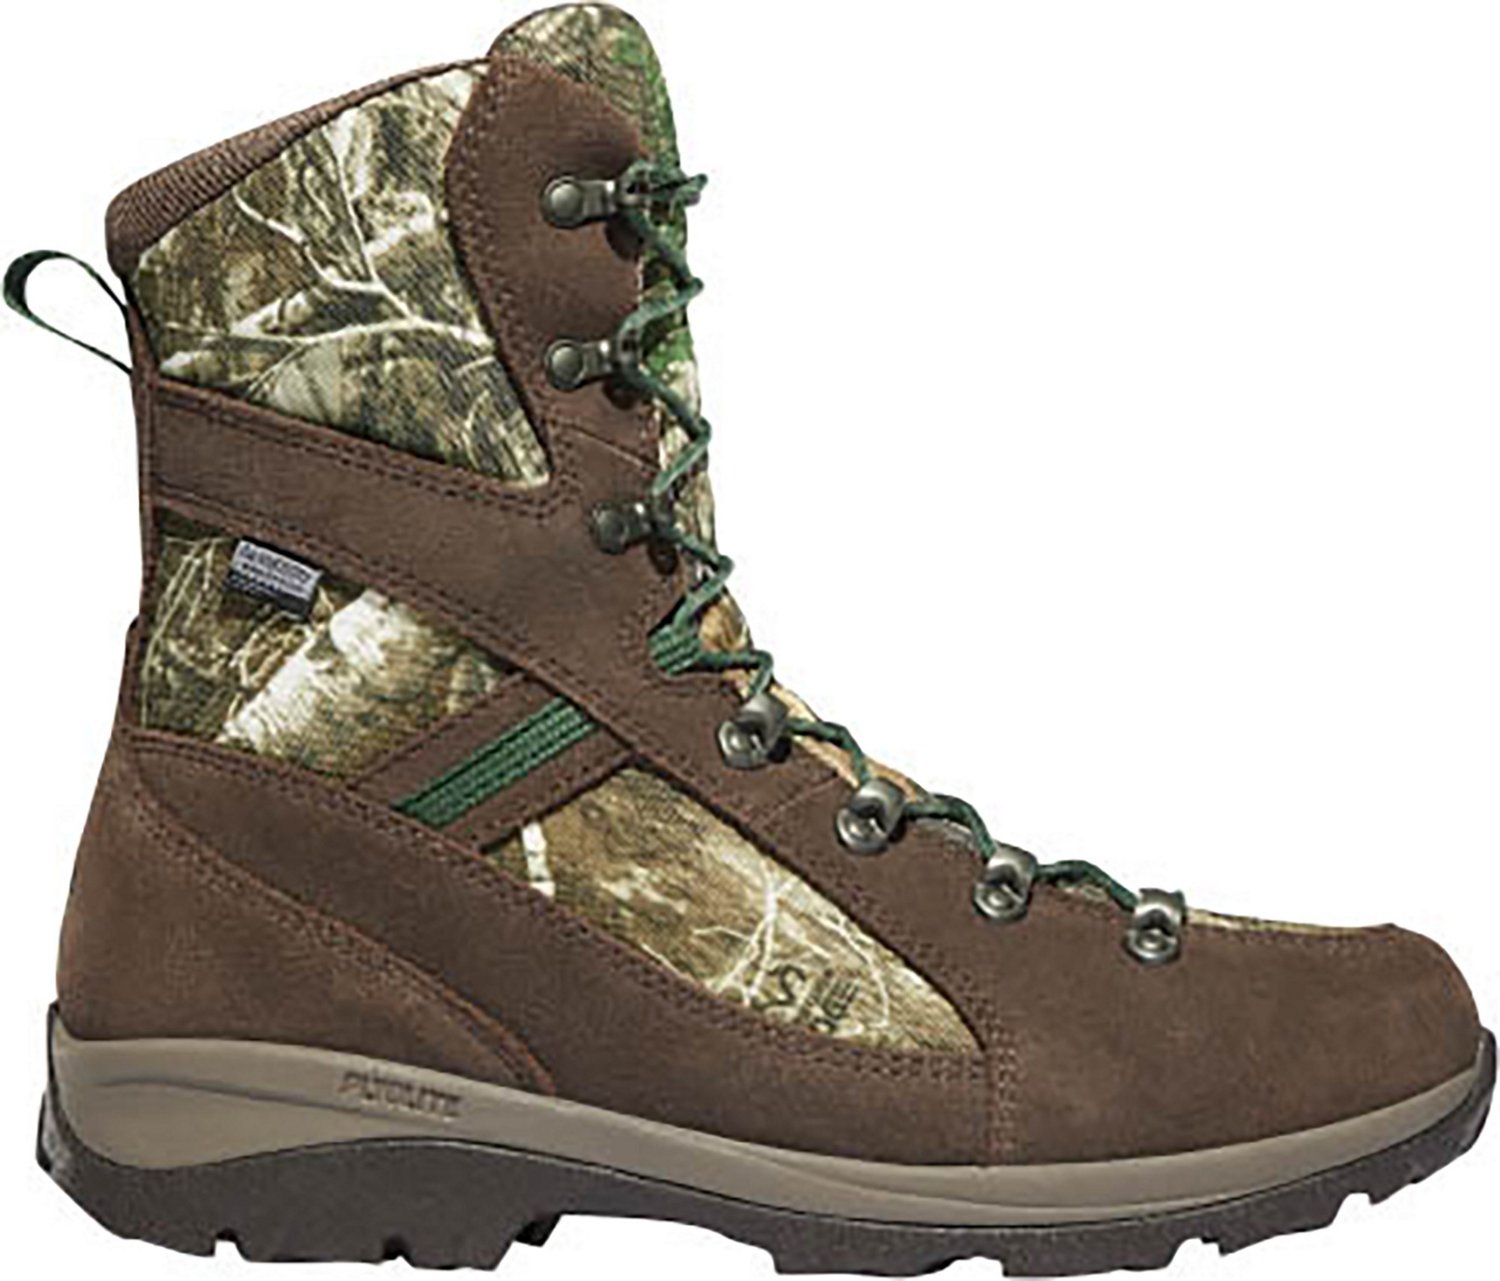 Danner Women's 8 in Wayfinder Insulated Hunting Boots | Academy